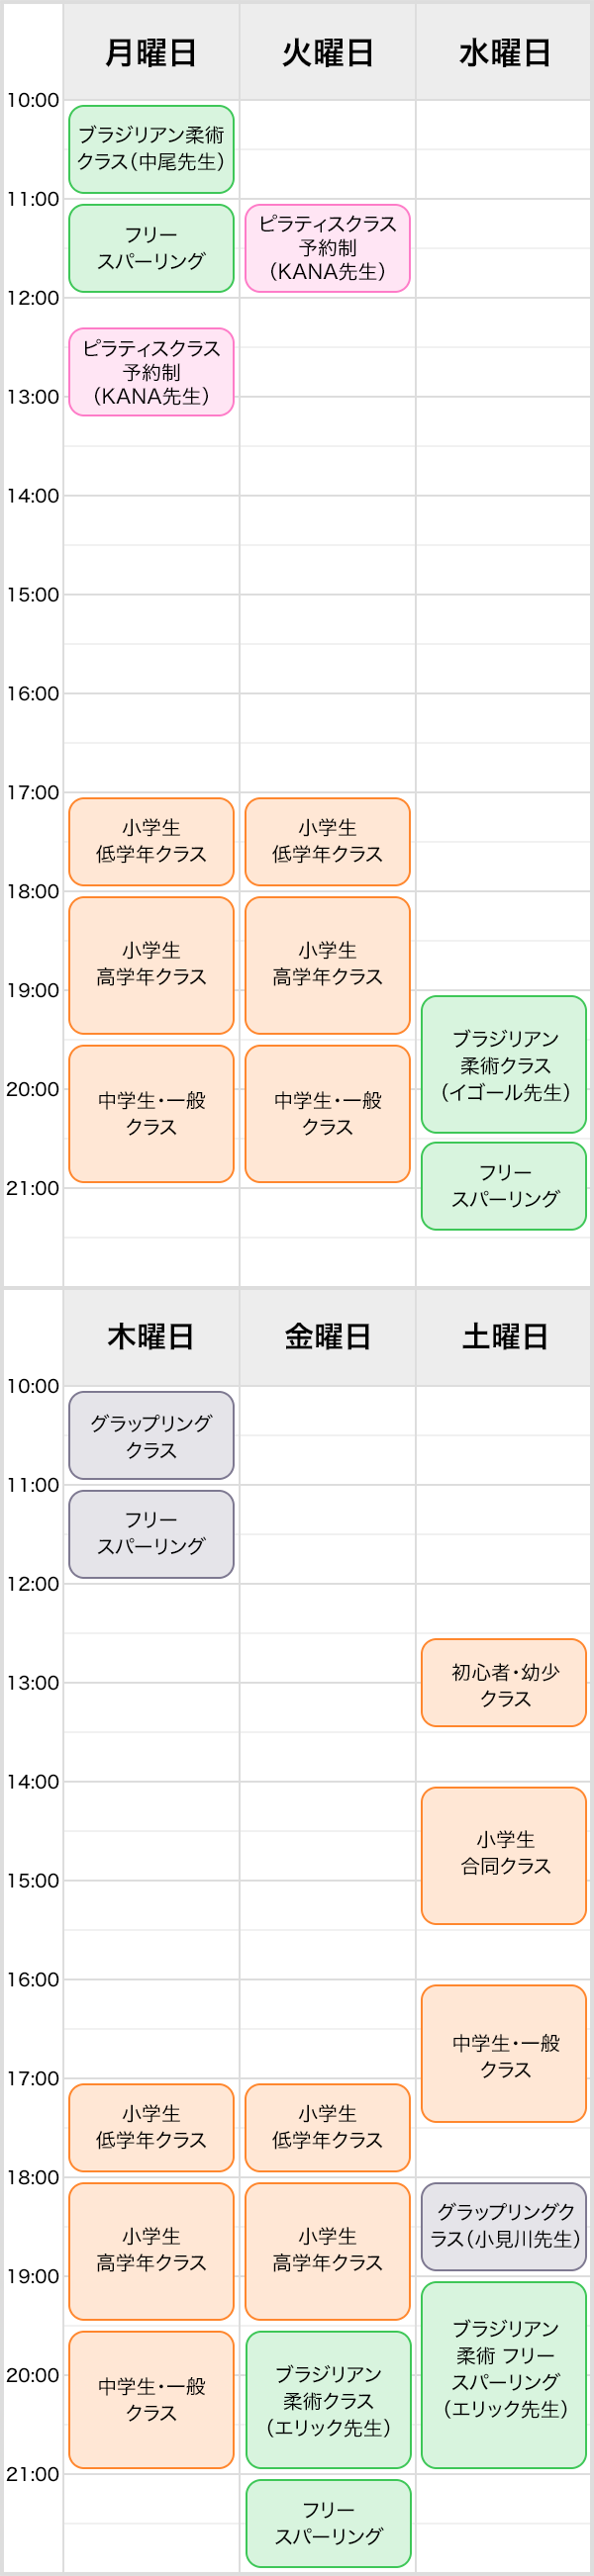 timetable-sp